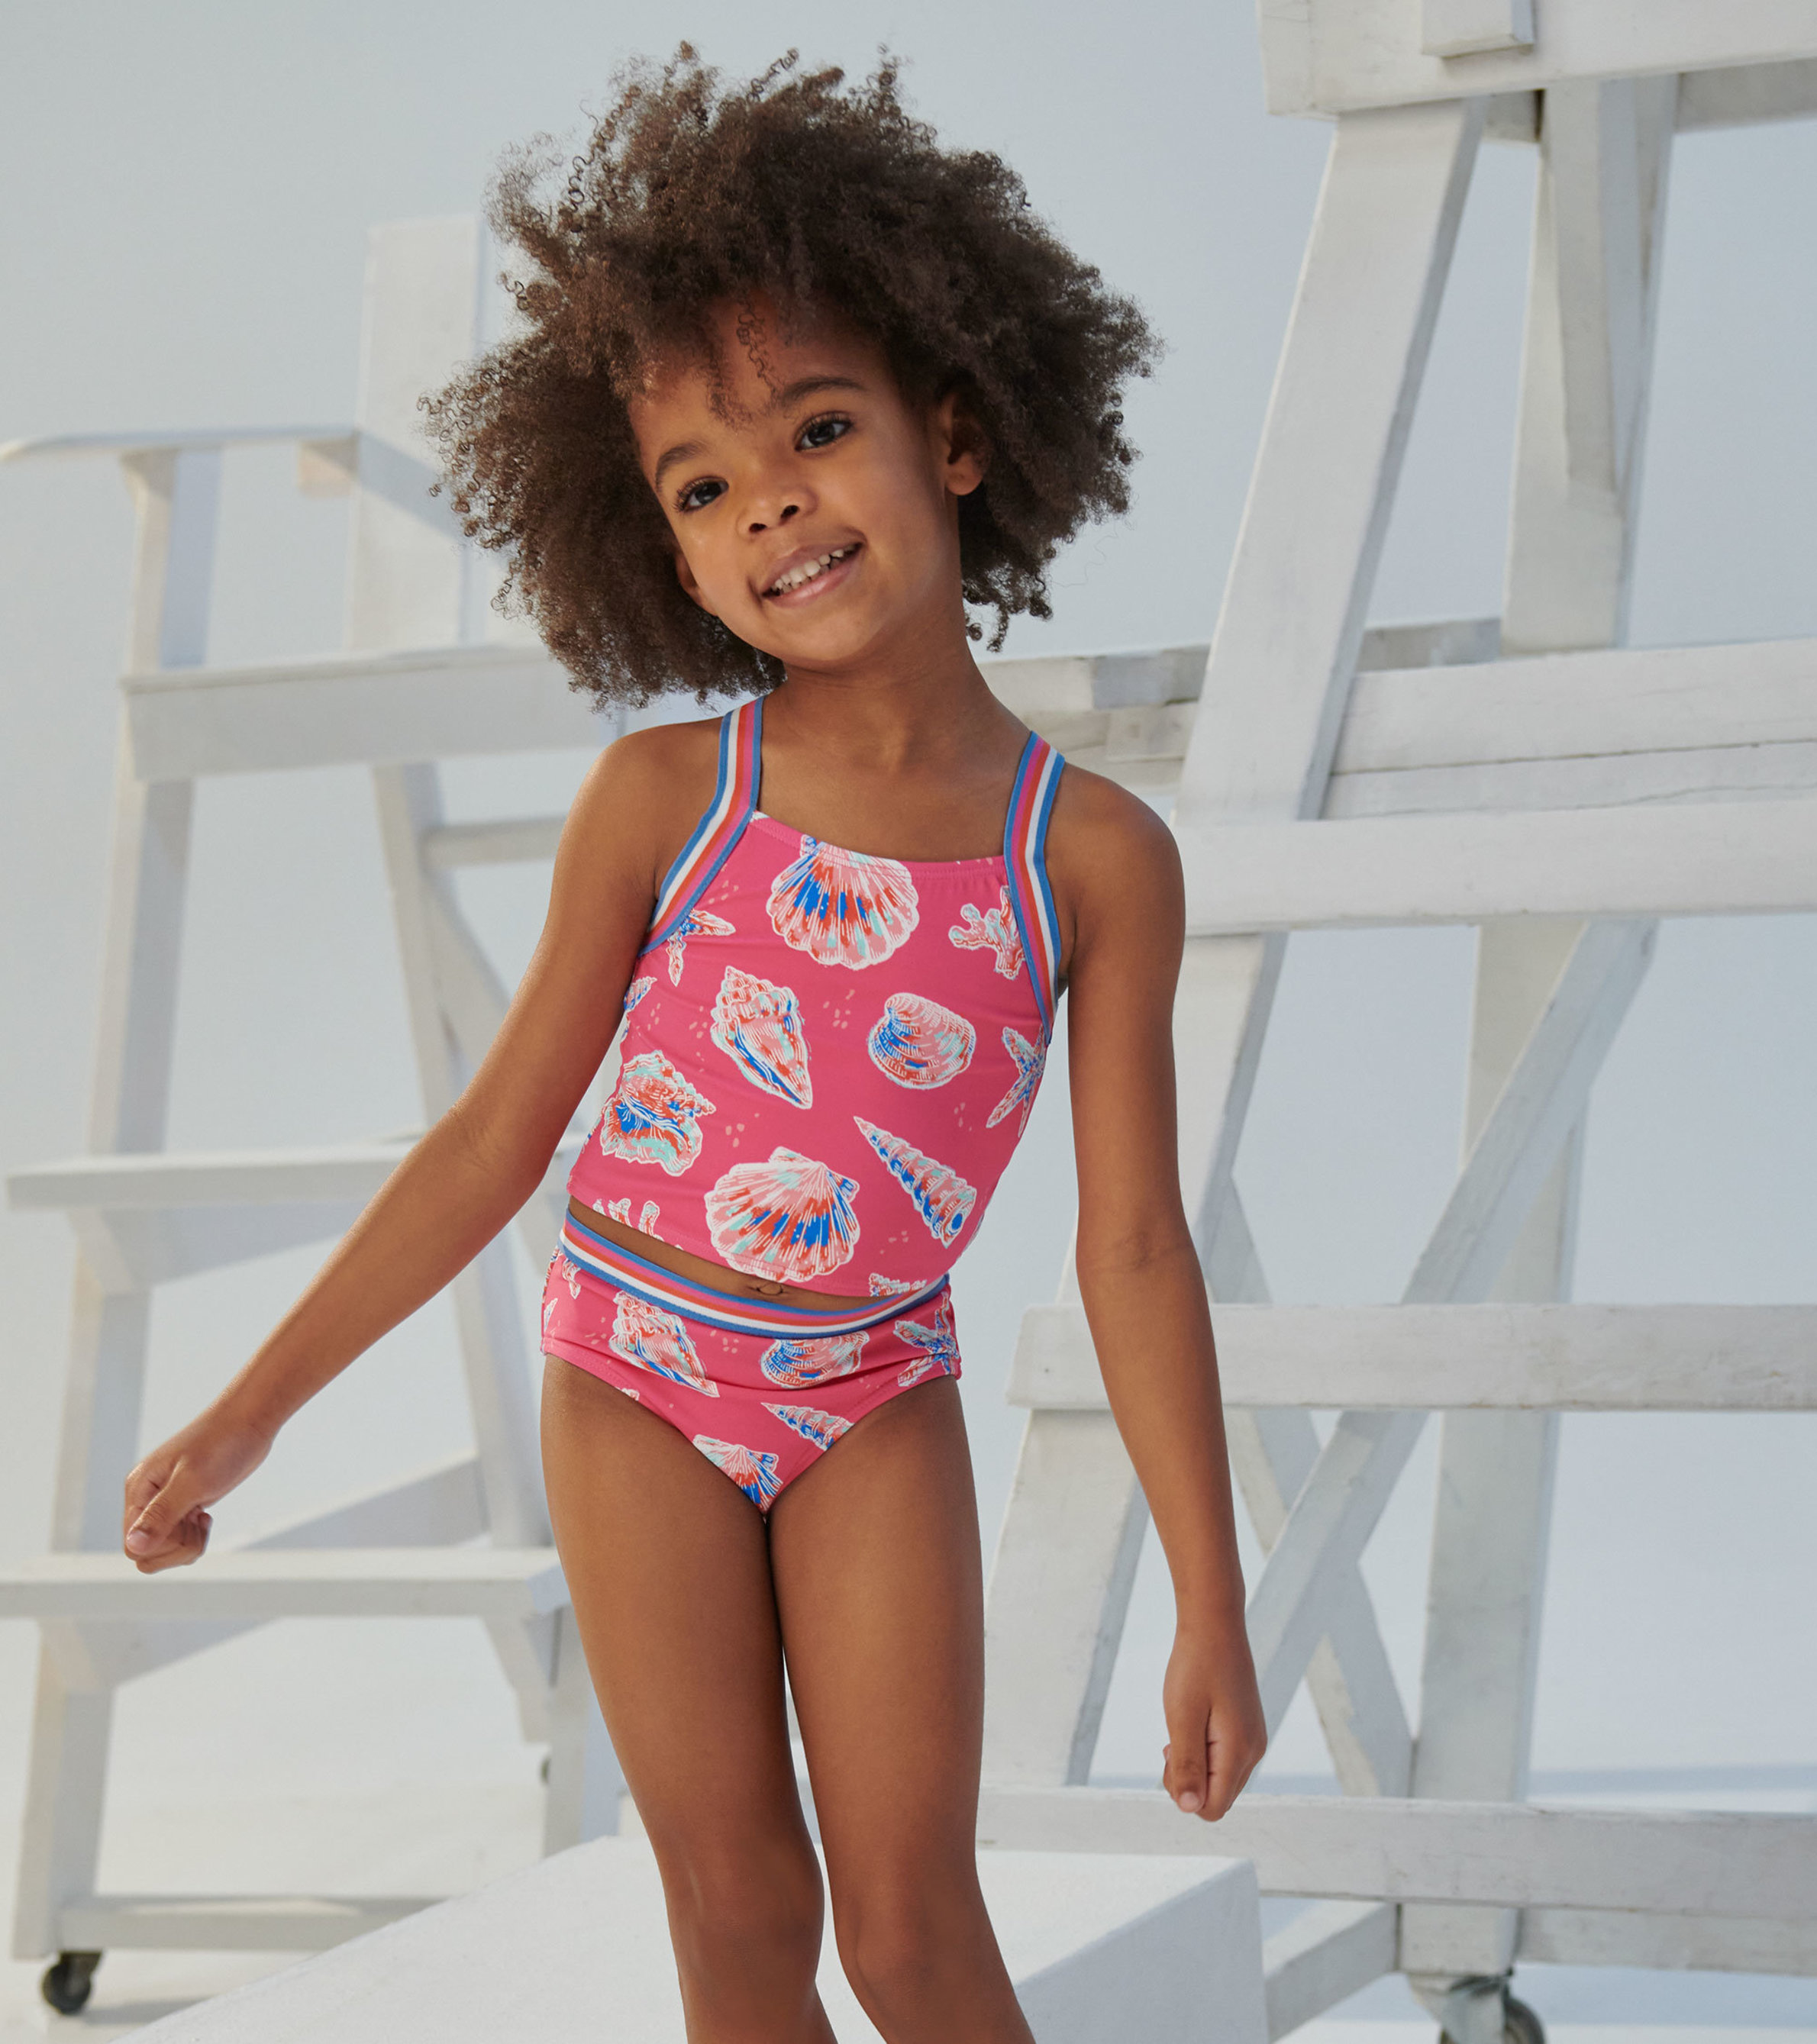 Kids Swimsuit Round-Up - Enjoying the Small Things